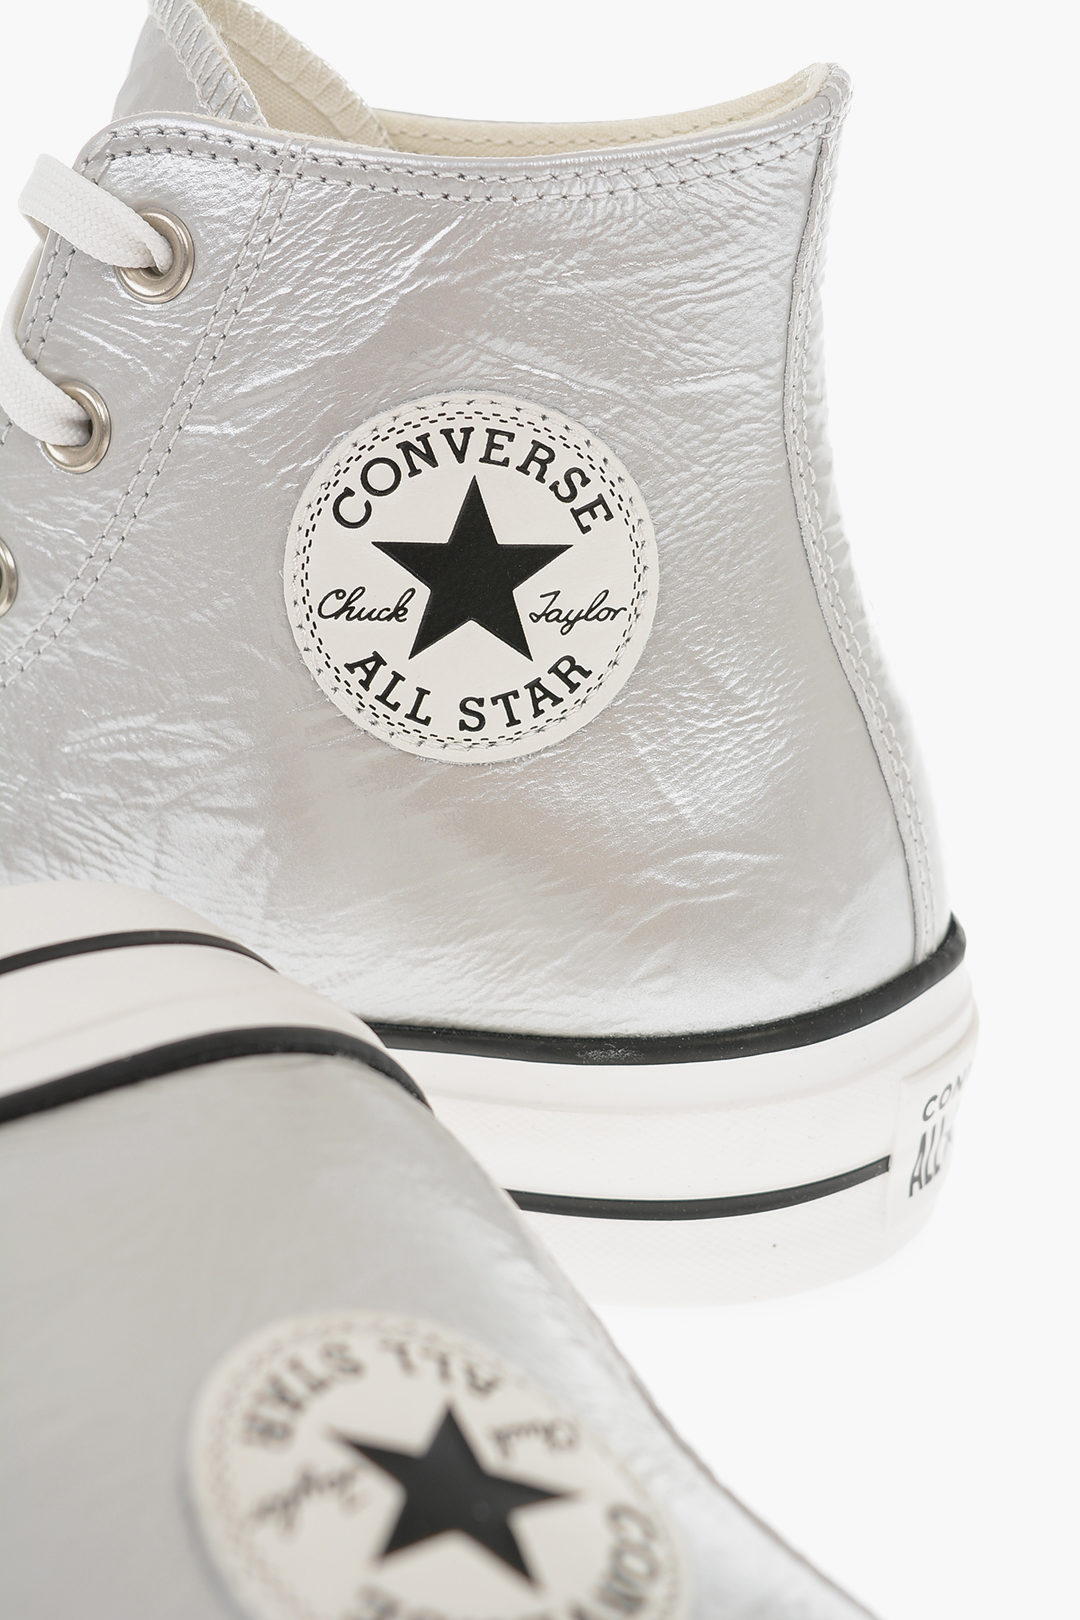 chuck taylor outlet